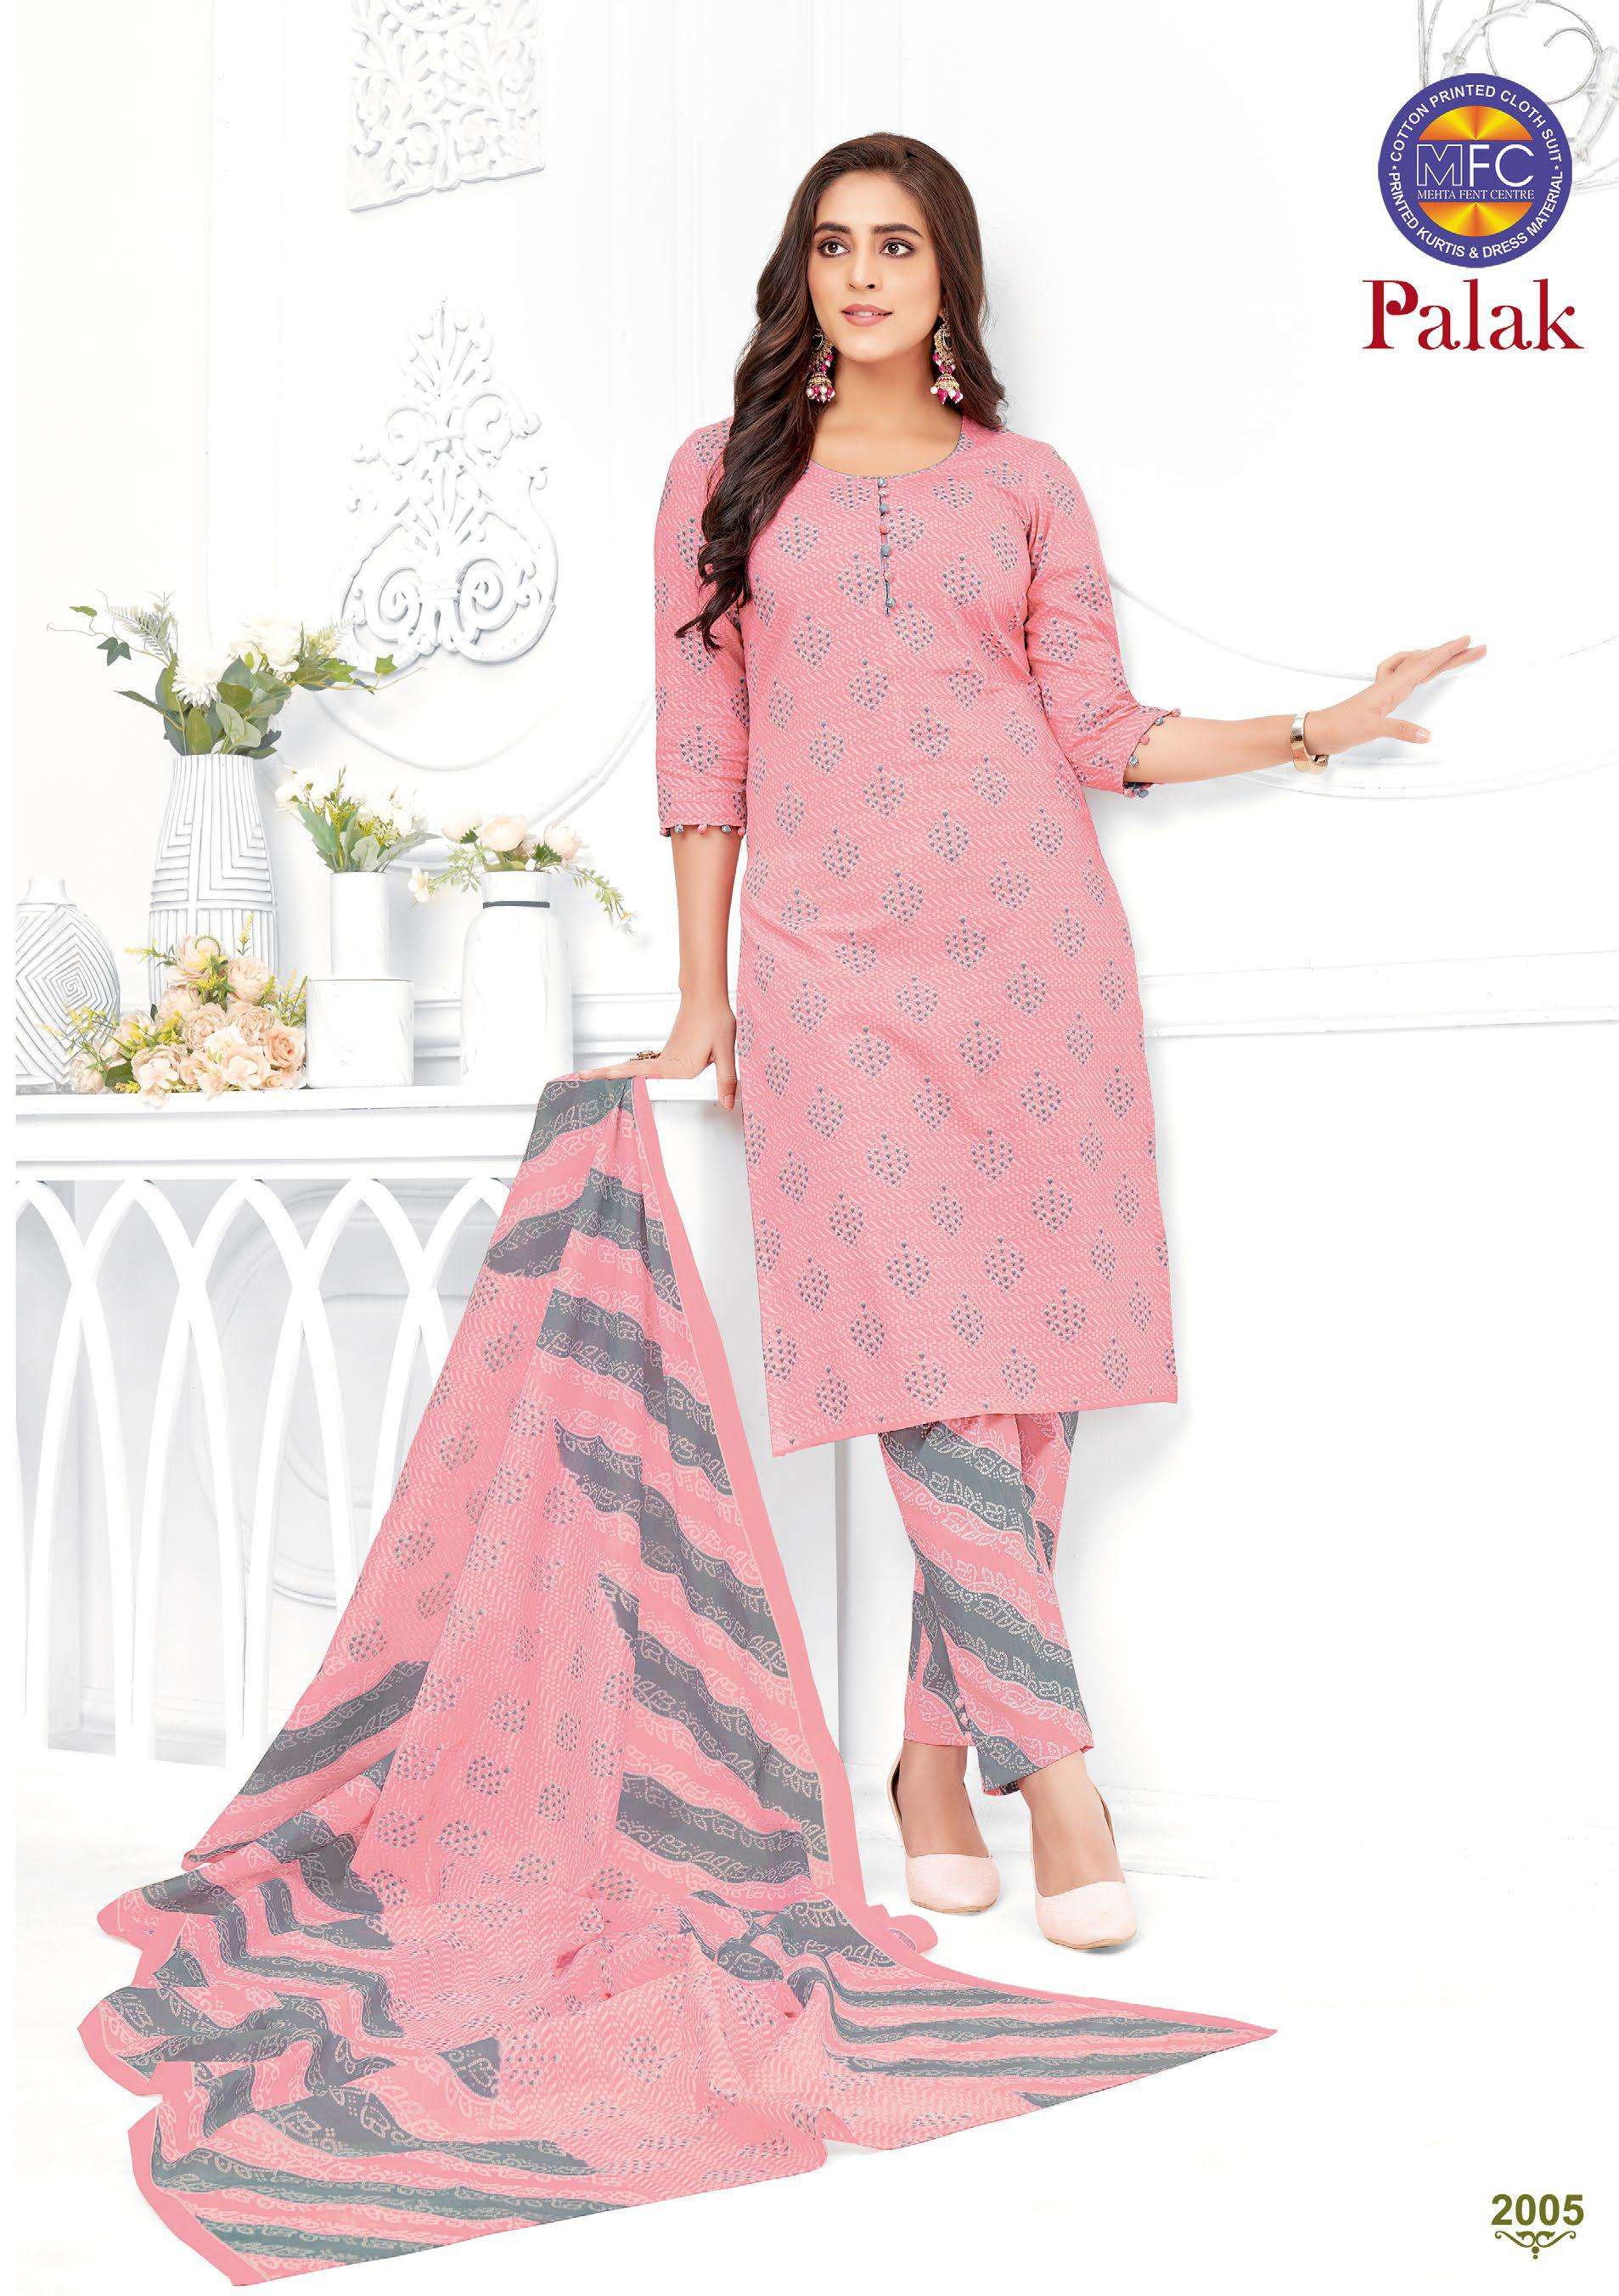 MFC PALAK VOL 2 READY MADE SUITS